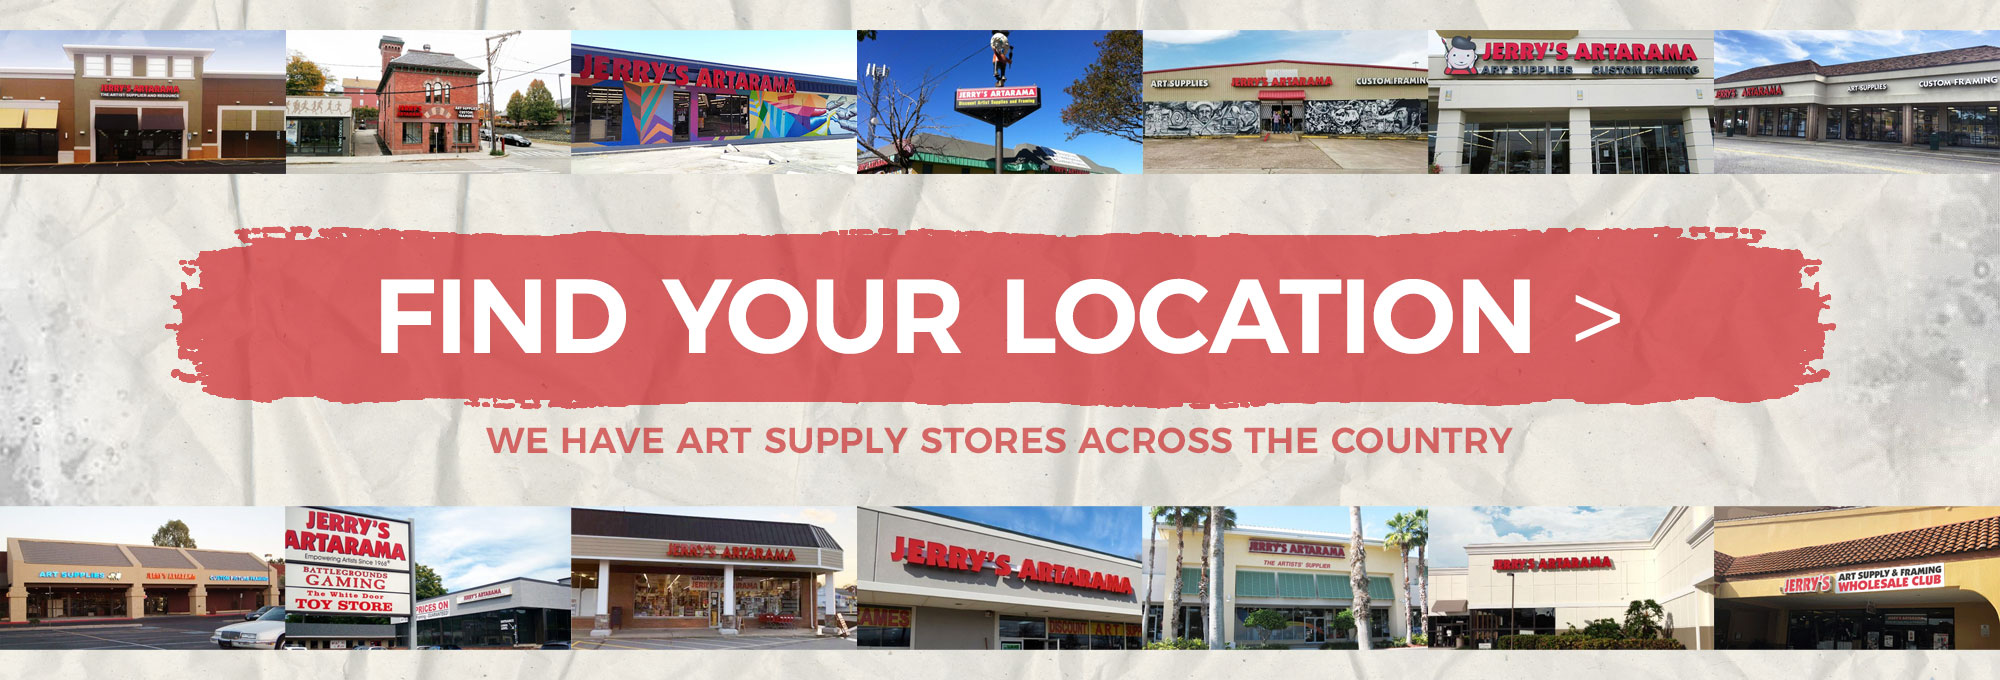 Jerry's Artarama Retail Stores - Your Local Art Supply Store